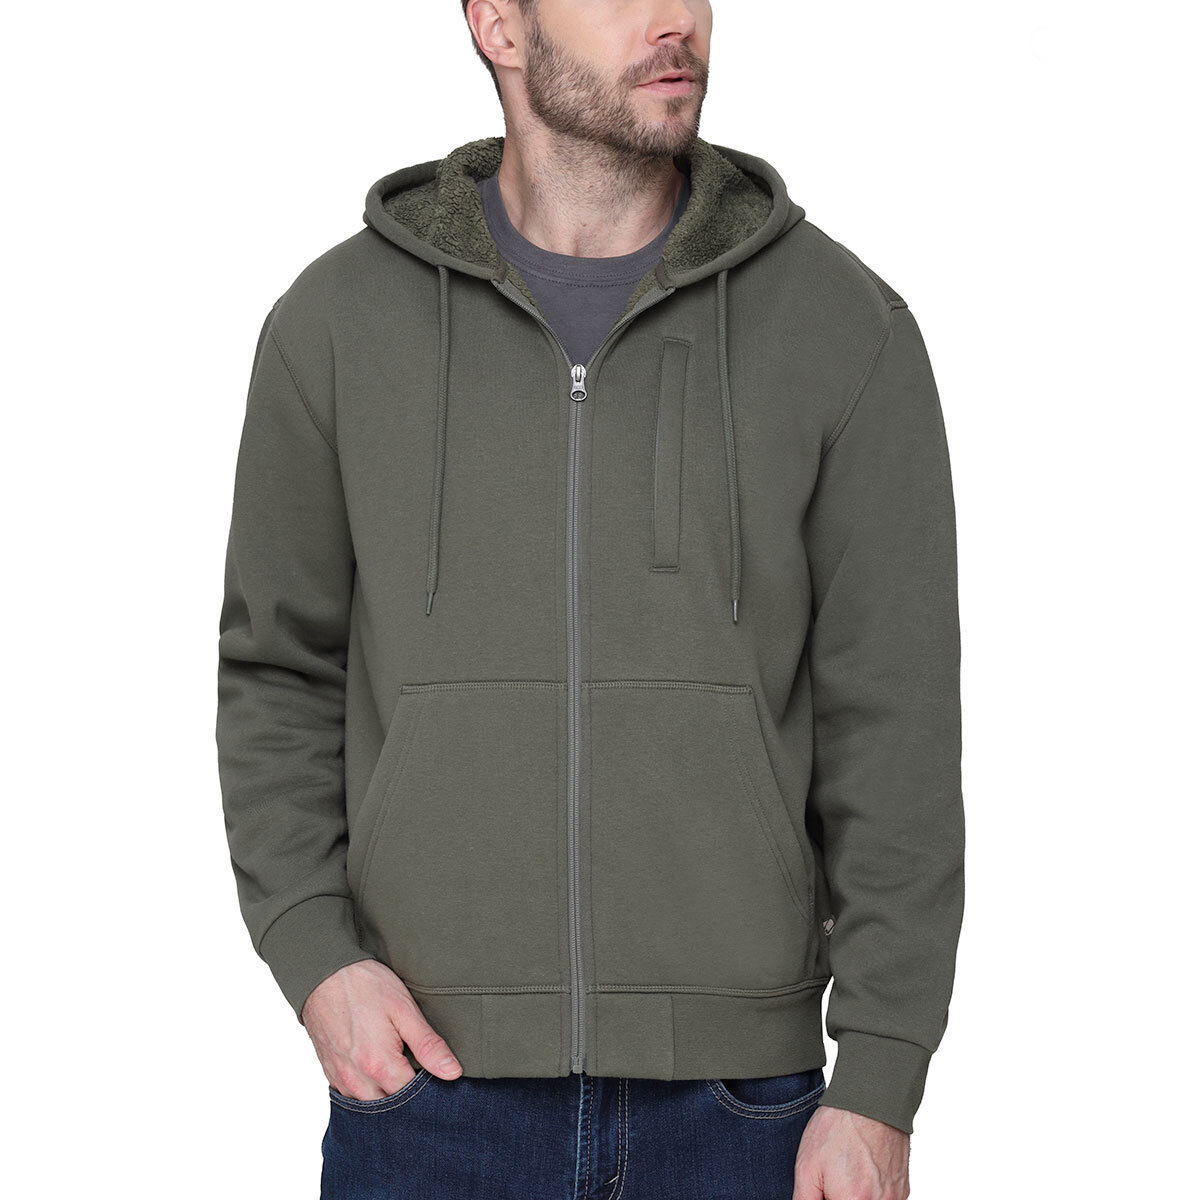 BC Clothing Fleece Lined Hoody in Olive | Costco UK